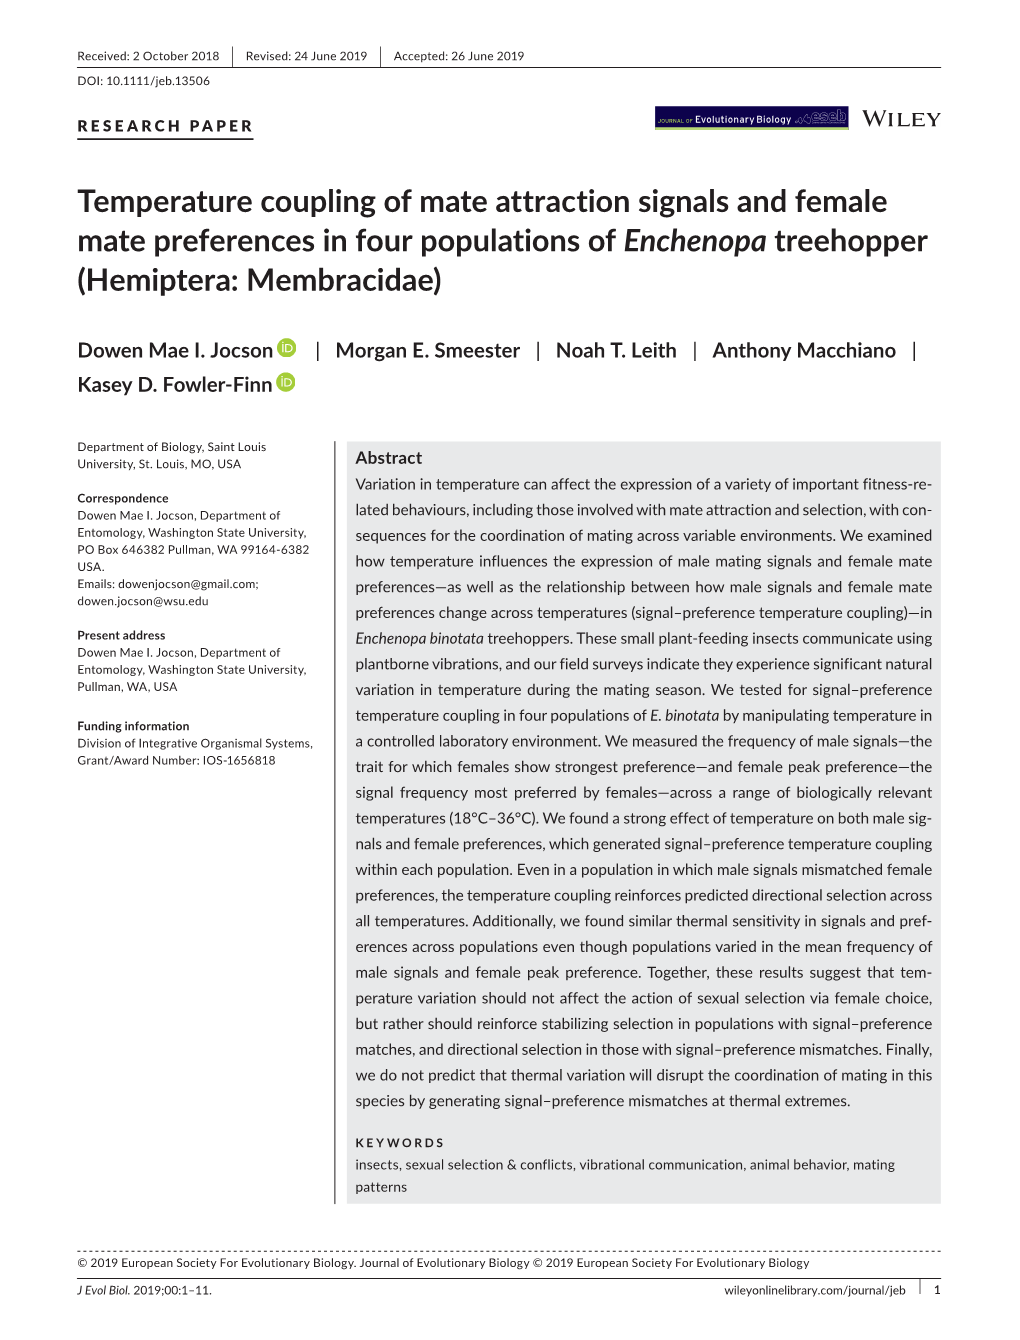 Temperature Coupling of Mate Attraction Signals and Female Mate Preferences in Four Populations of Enchenopa Treehopper (Hemiptera: Membracidae)